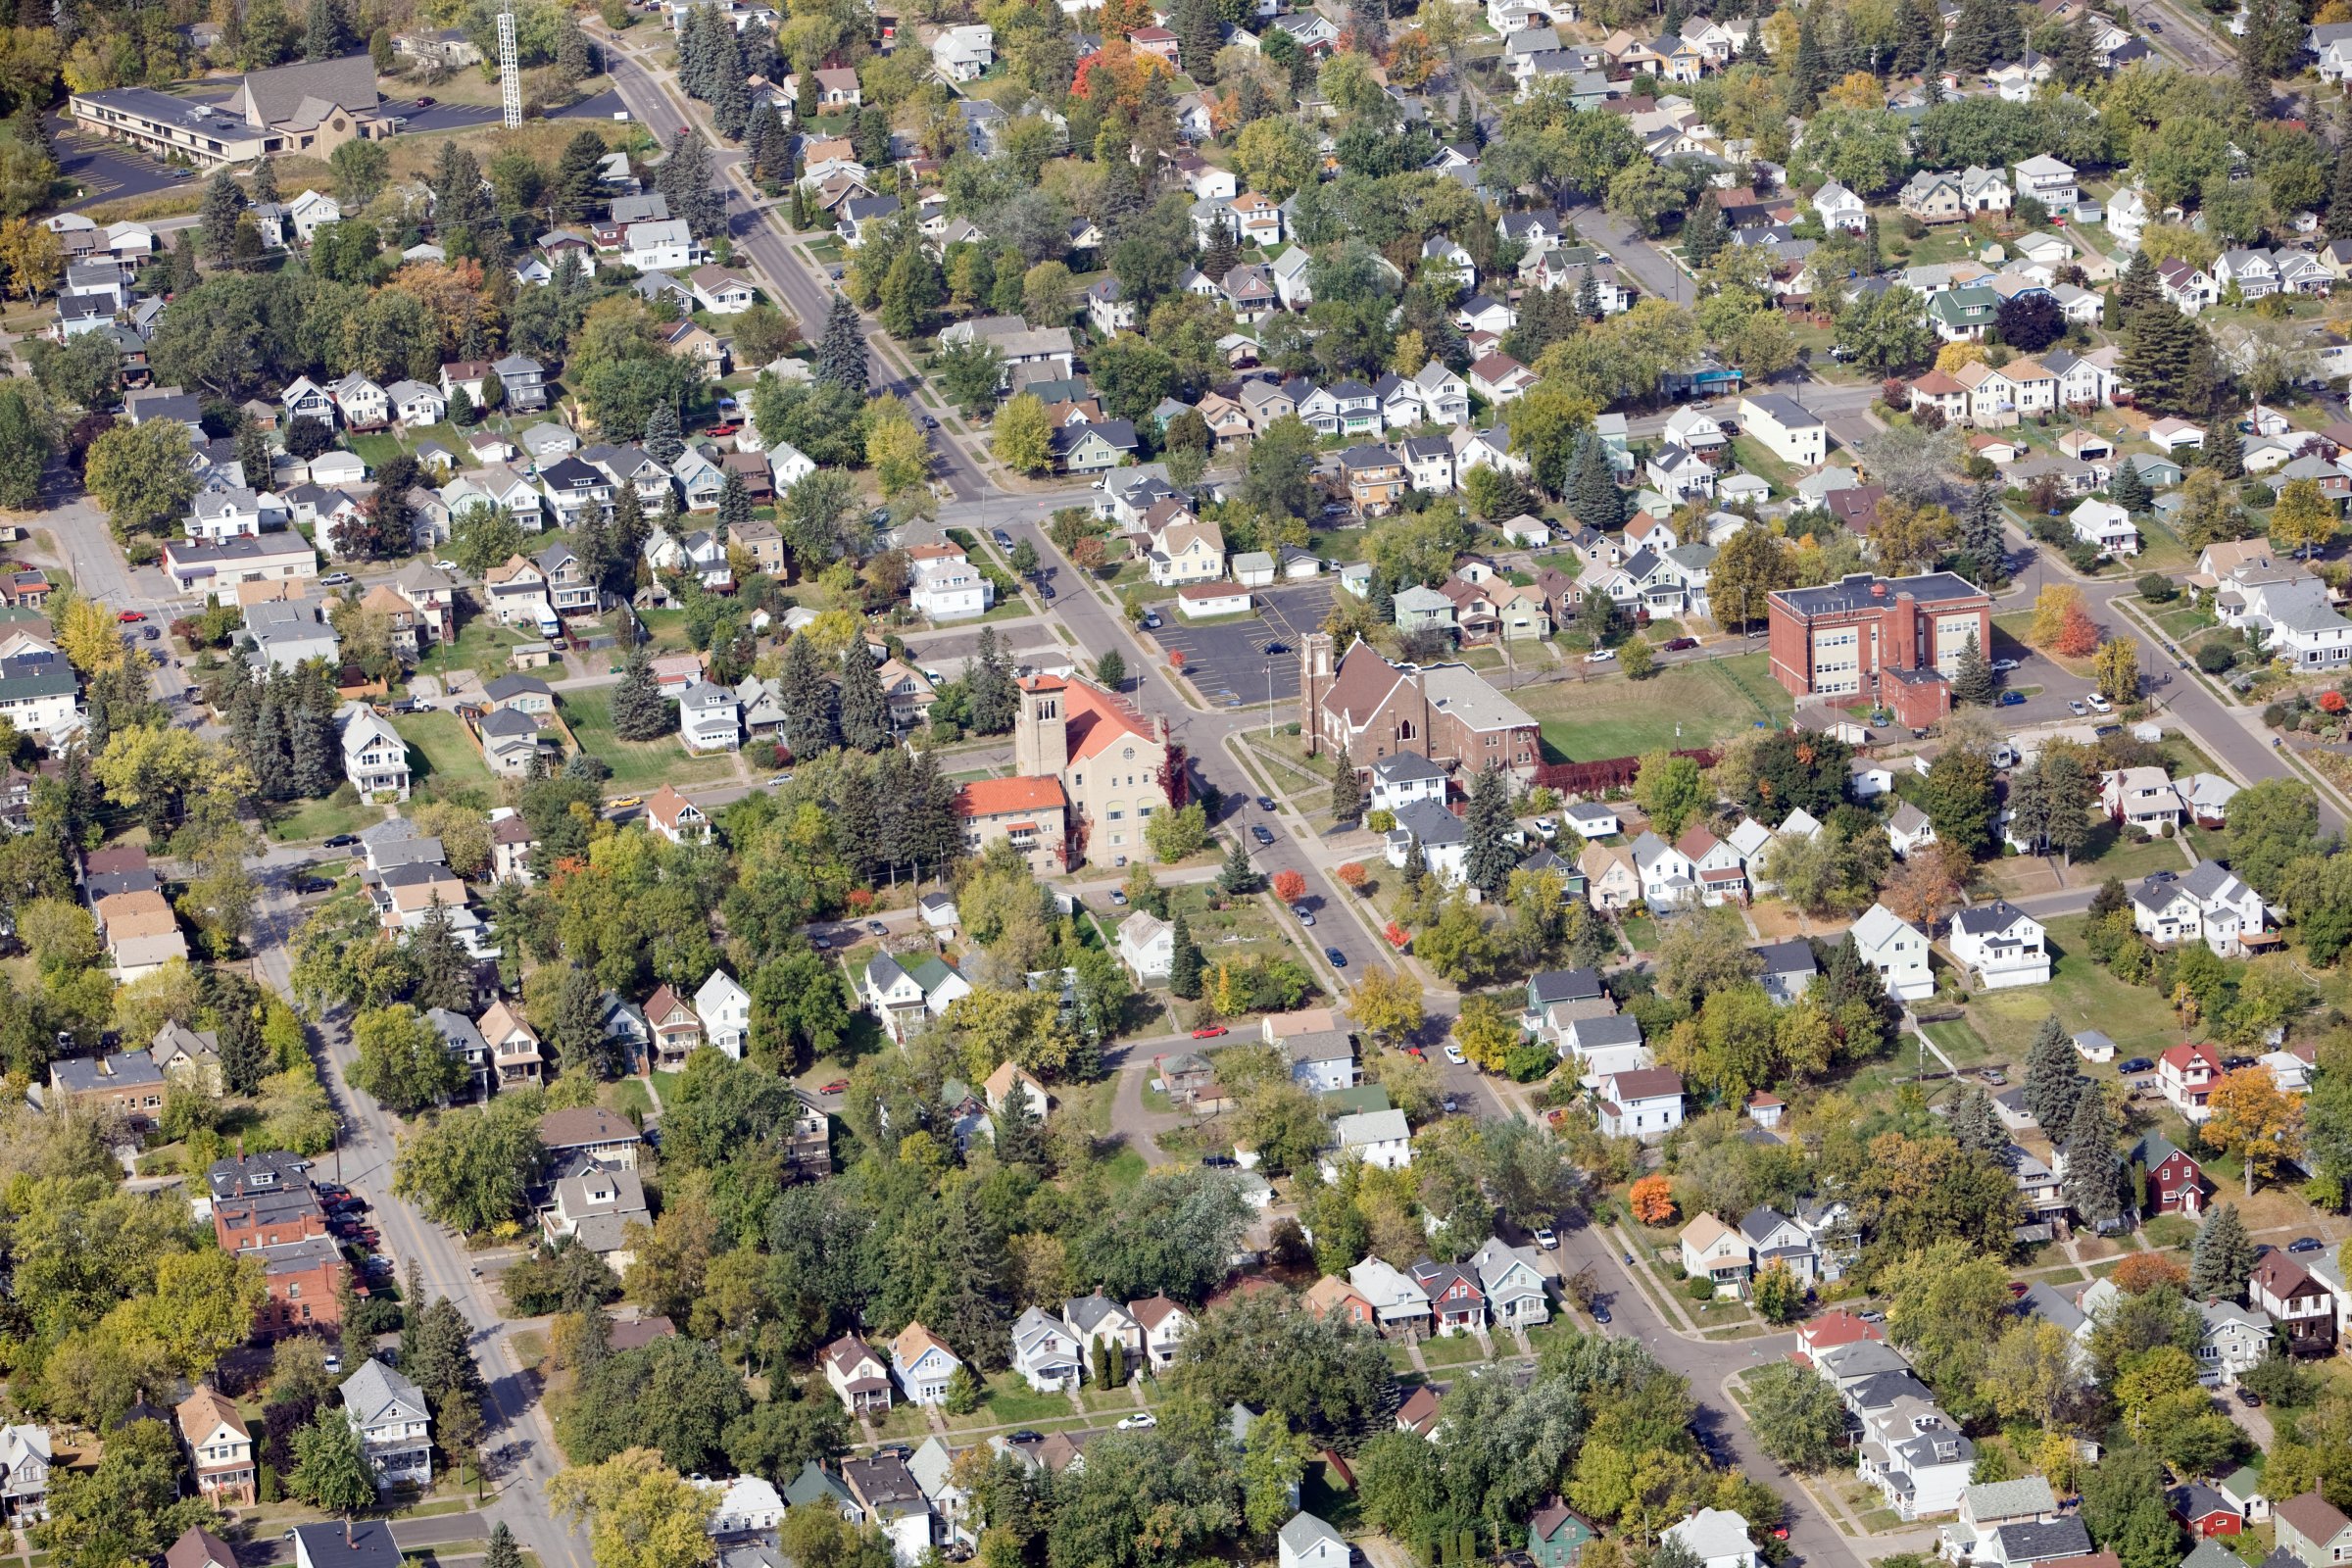 Residential Neighborhood Aerial with Homes, Churches and a School